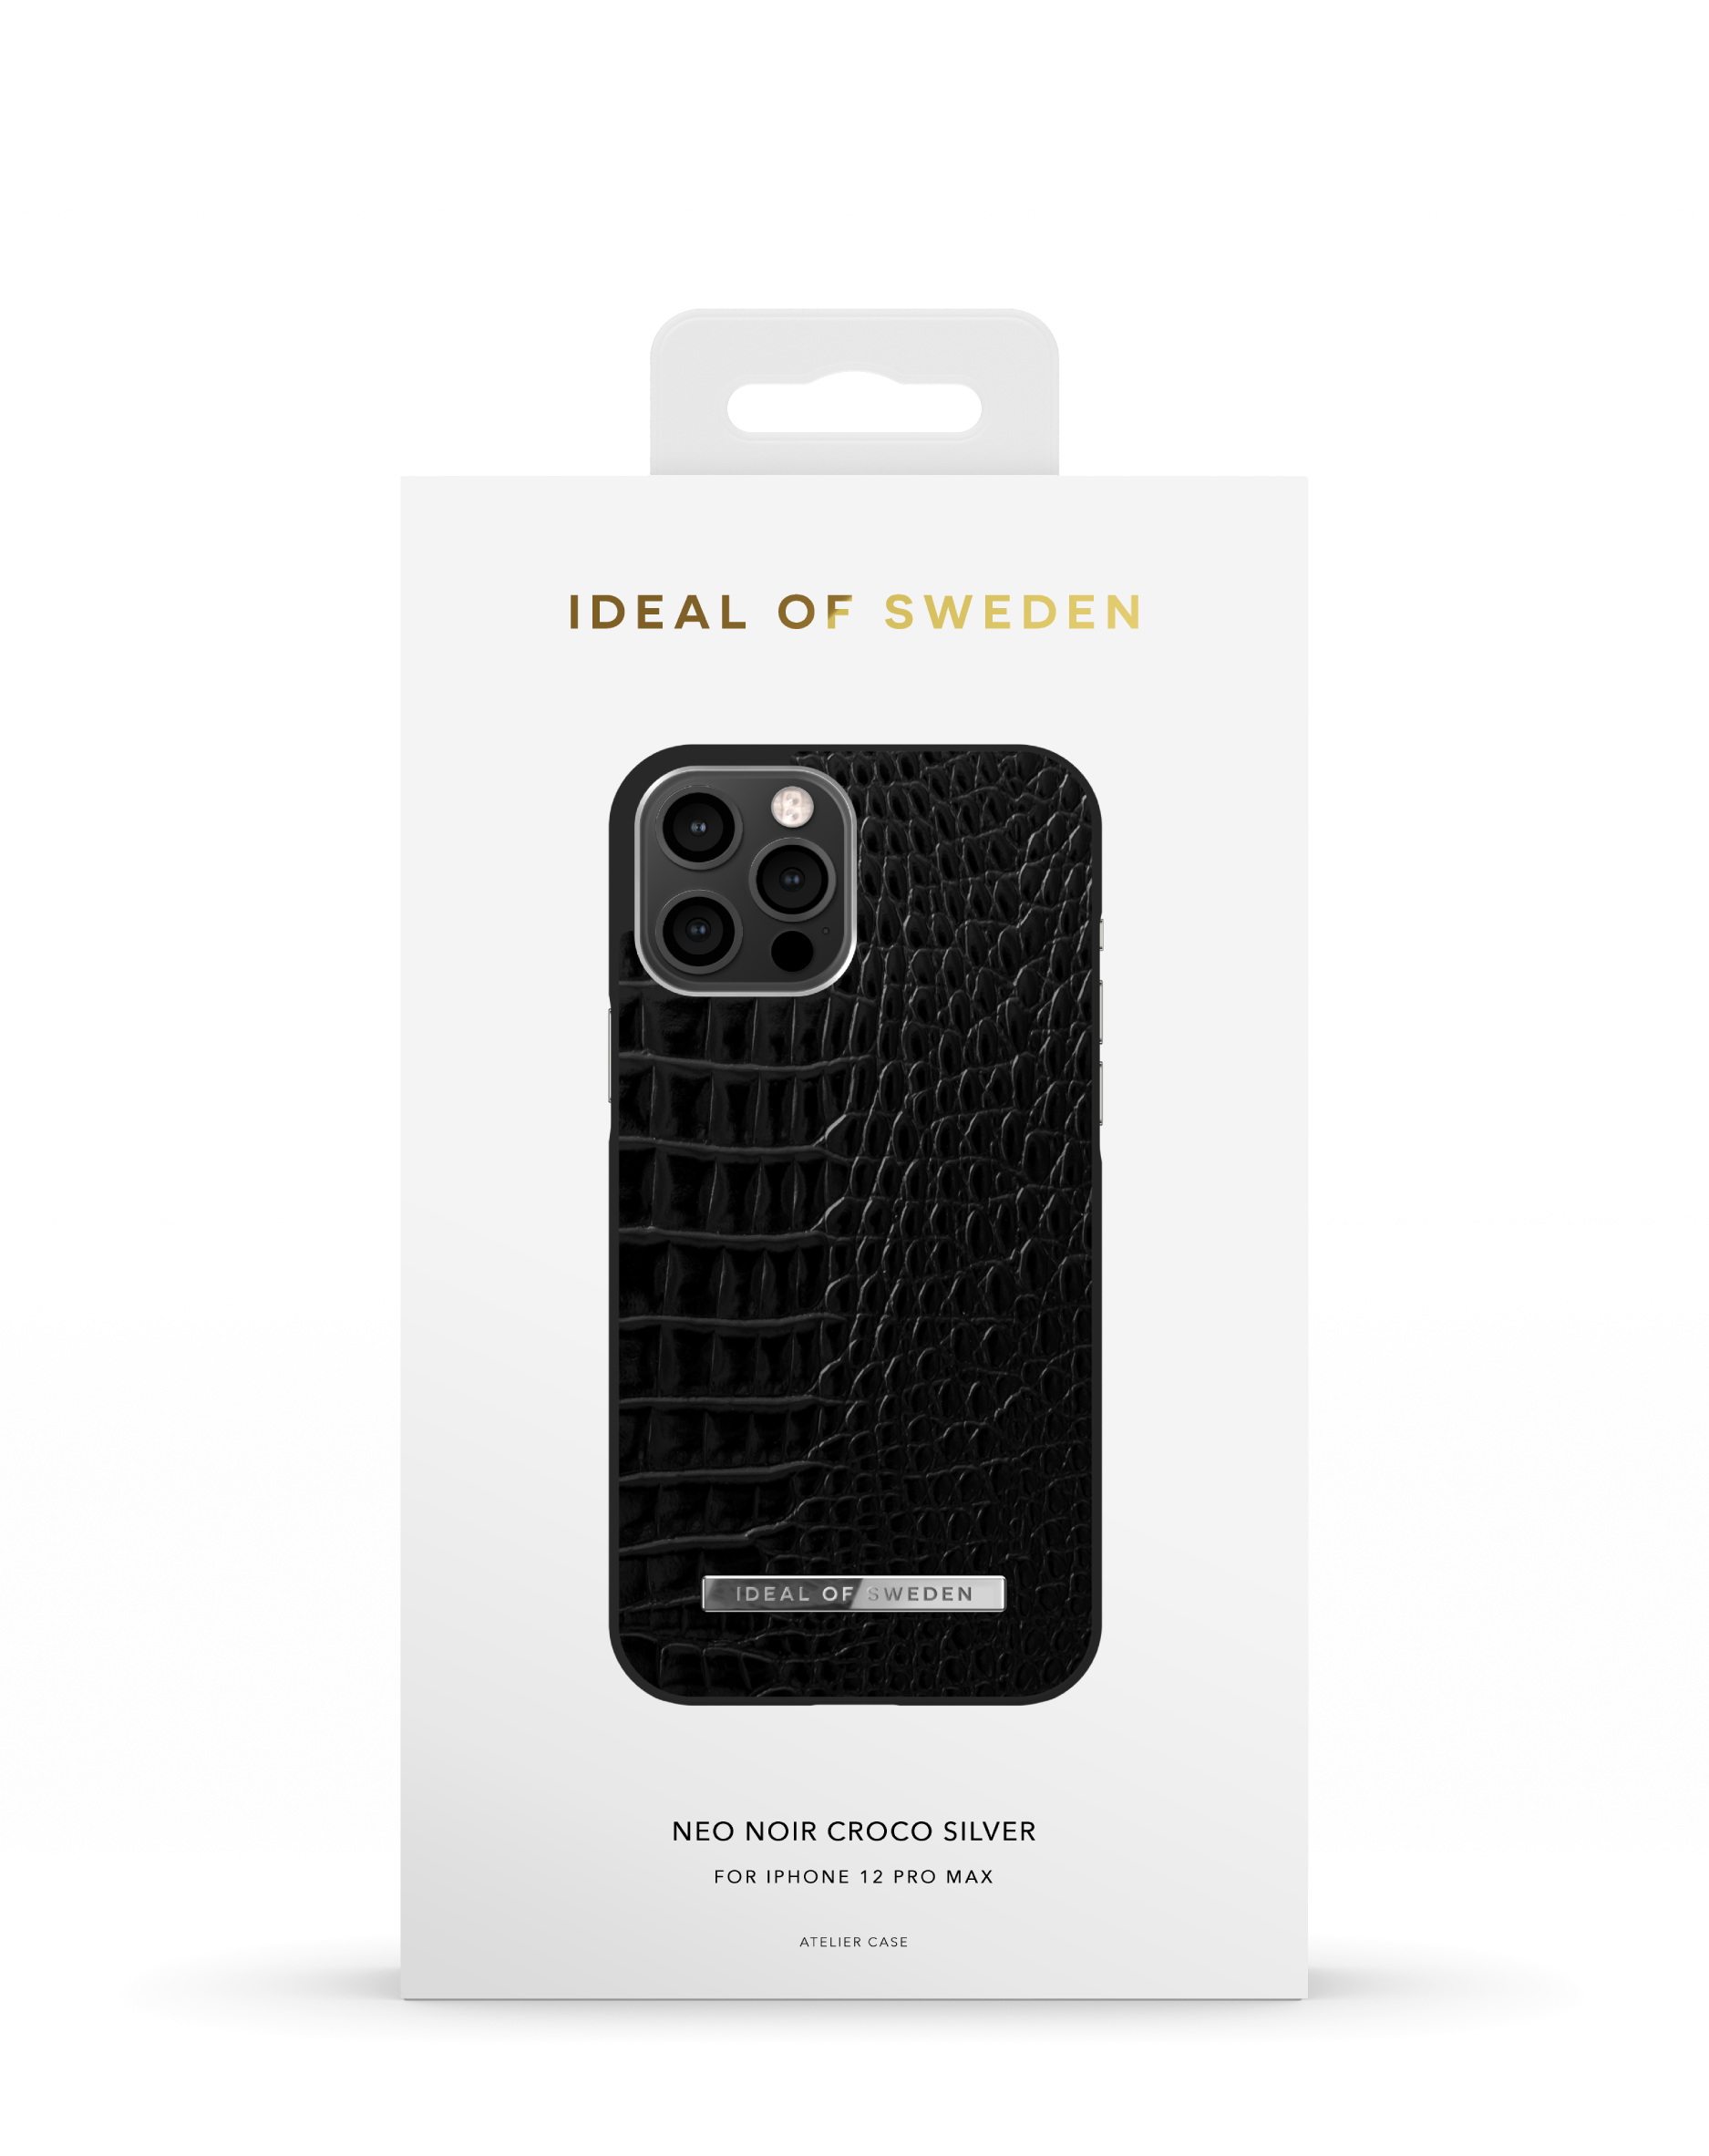 Neo Noir SWEDEN IDACSS21-I2067, Backcover, Silver IDEAL Max, Croco OF Pro IPhone Apple, 12